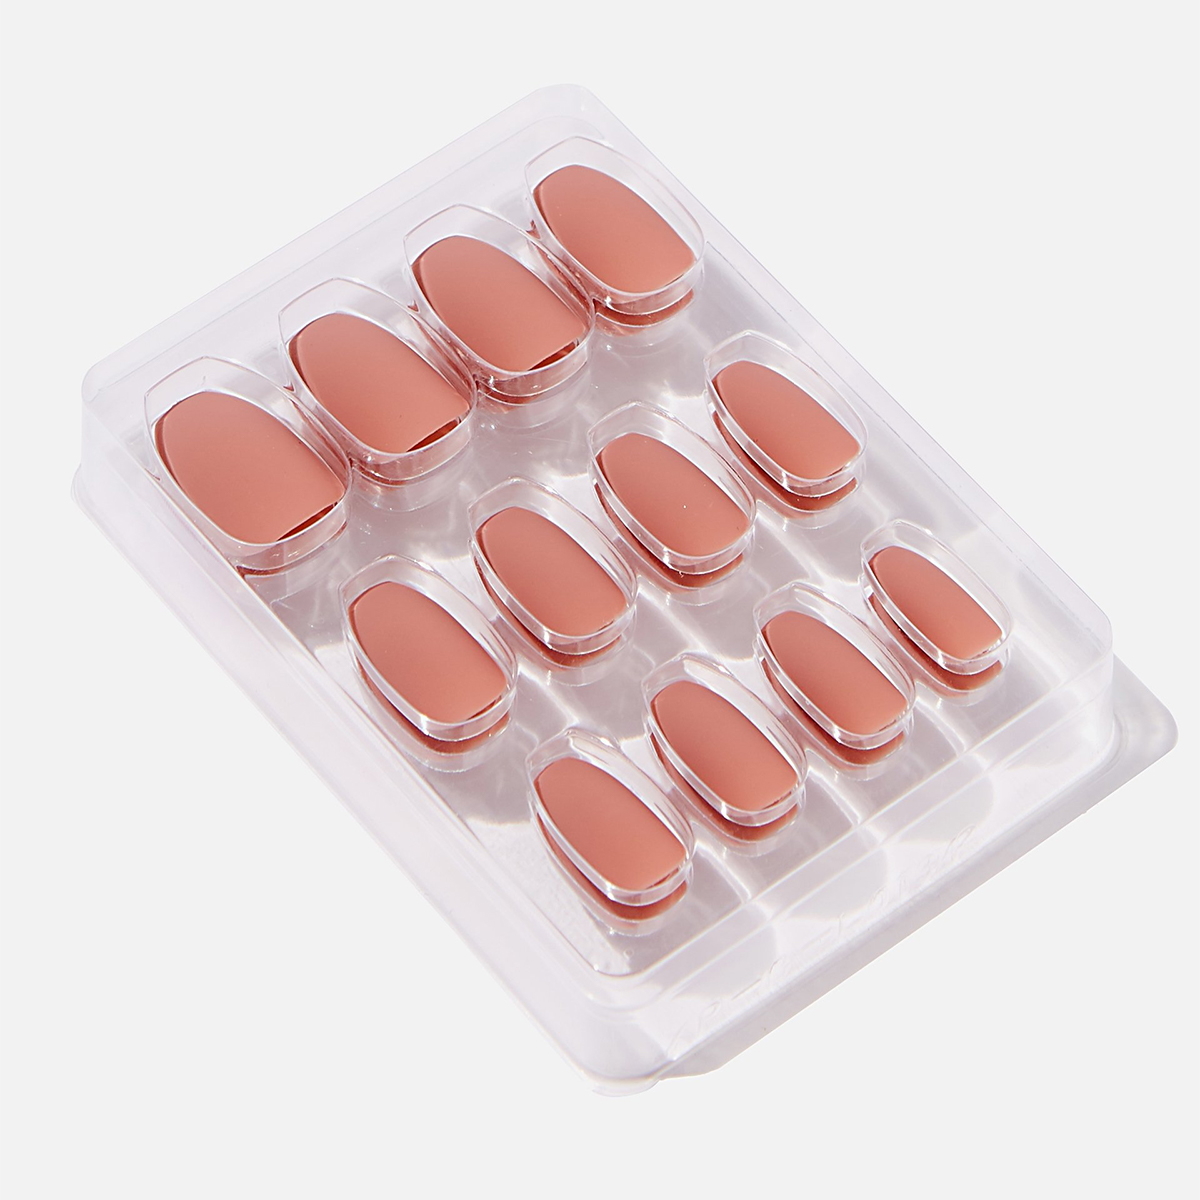 Clear plastic packet of 12 stick on nails in blush pink.